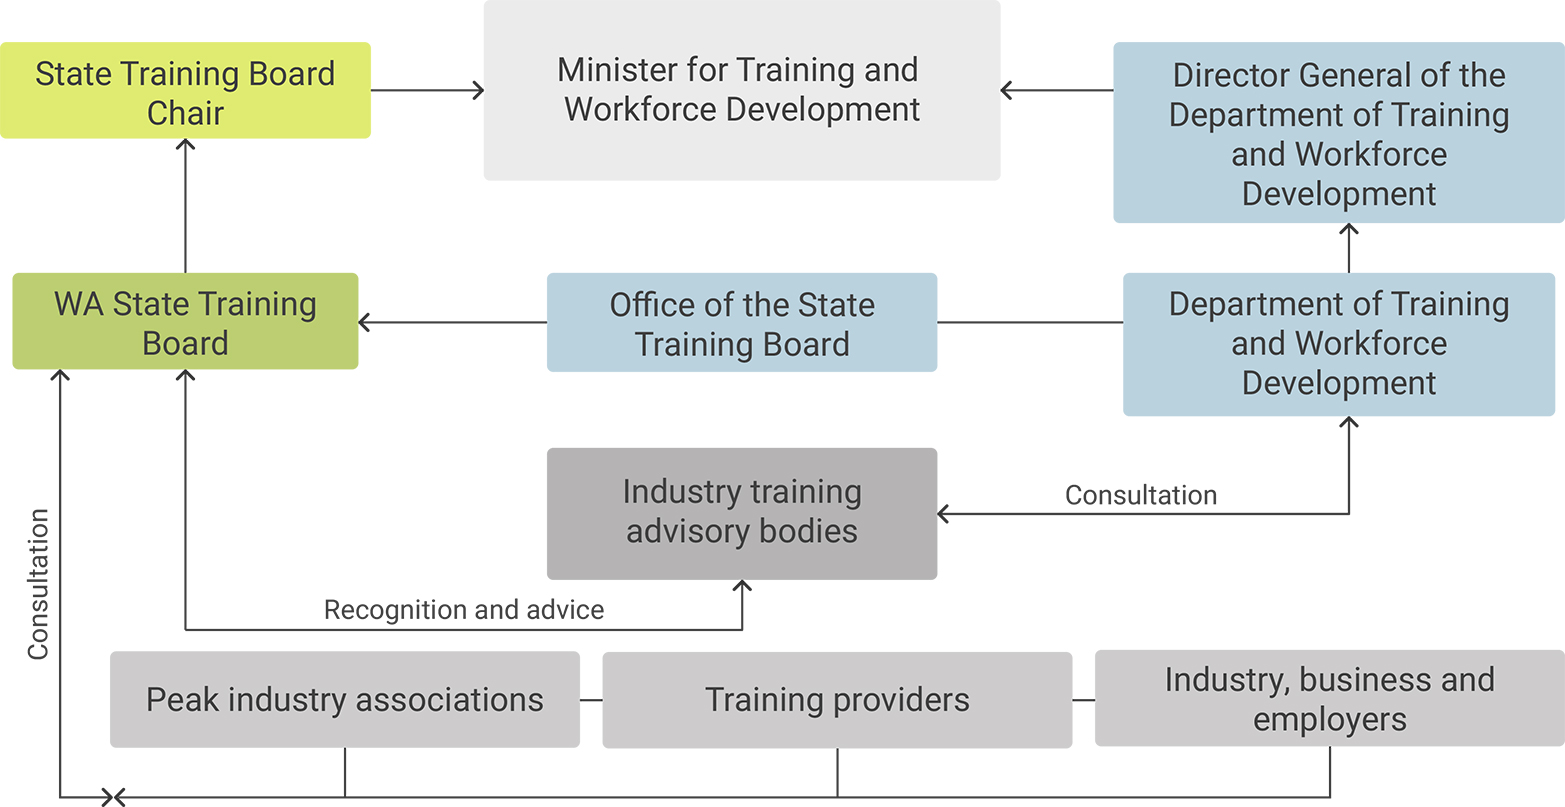 Flowchart diagram for work of the State Training Board which includes the Office of the State Training Board, the Minister for Training and Workforce Development, Industry training advisory bodies, training providers, industry, business and employers connected by green, blue and grey boxes flowing in a chart across the page.